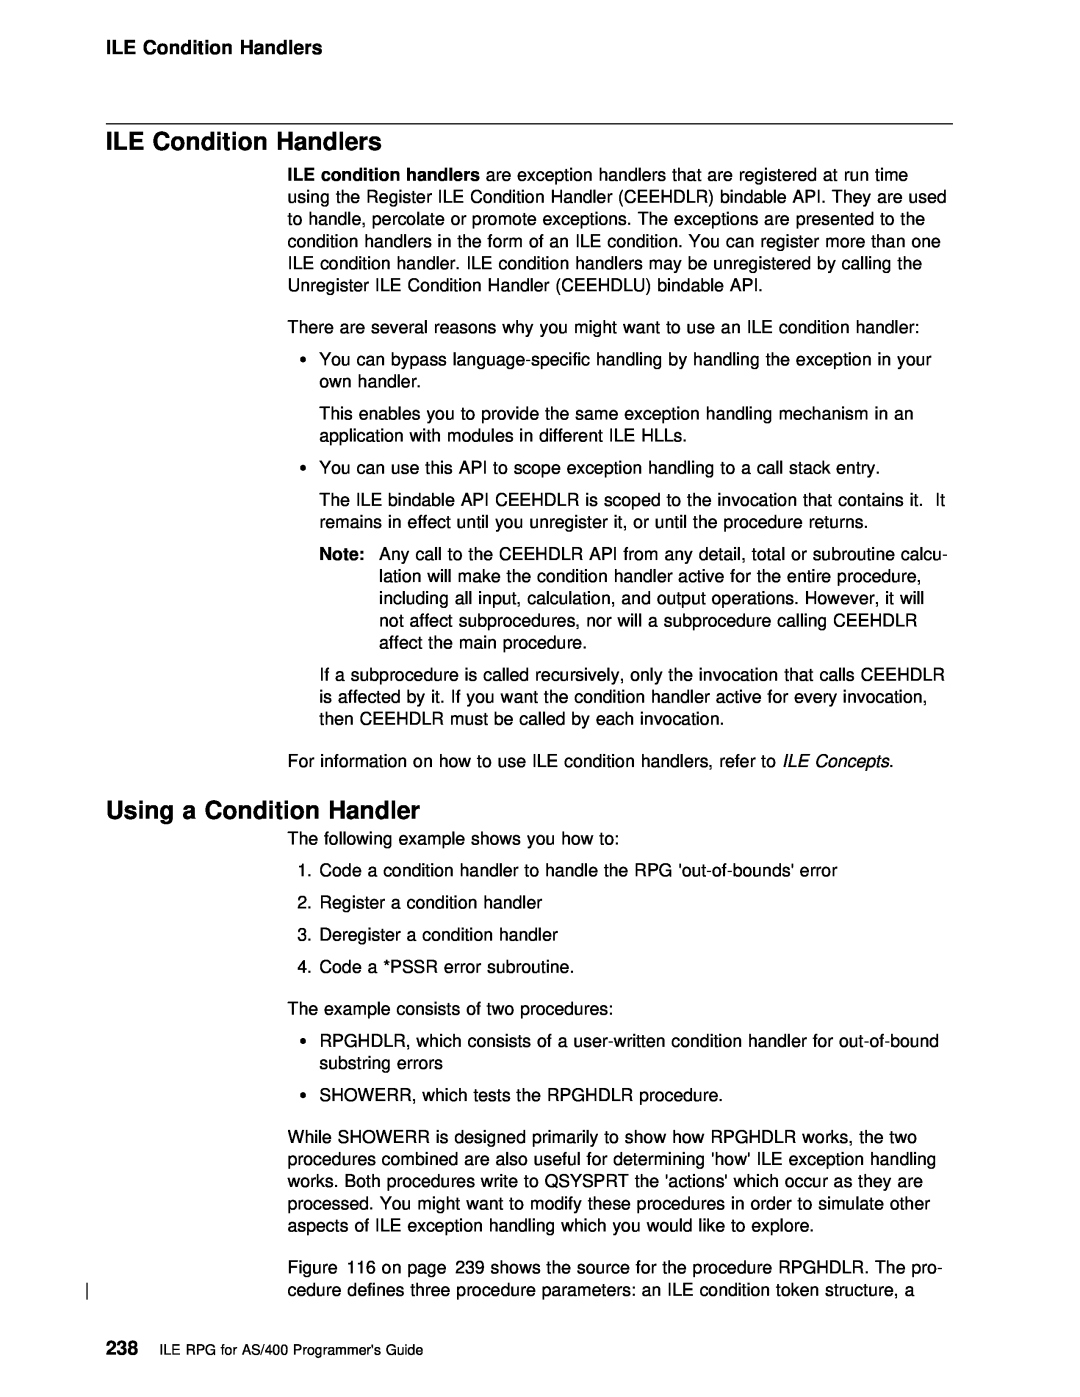 IBM AS/400 manual ILE Condition Handlers, Using a Condition Handler 